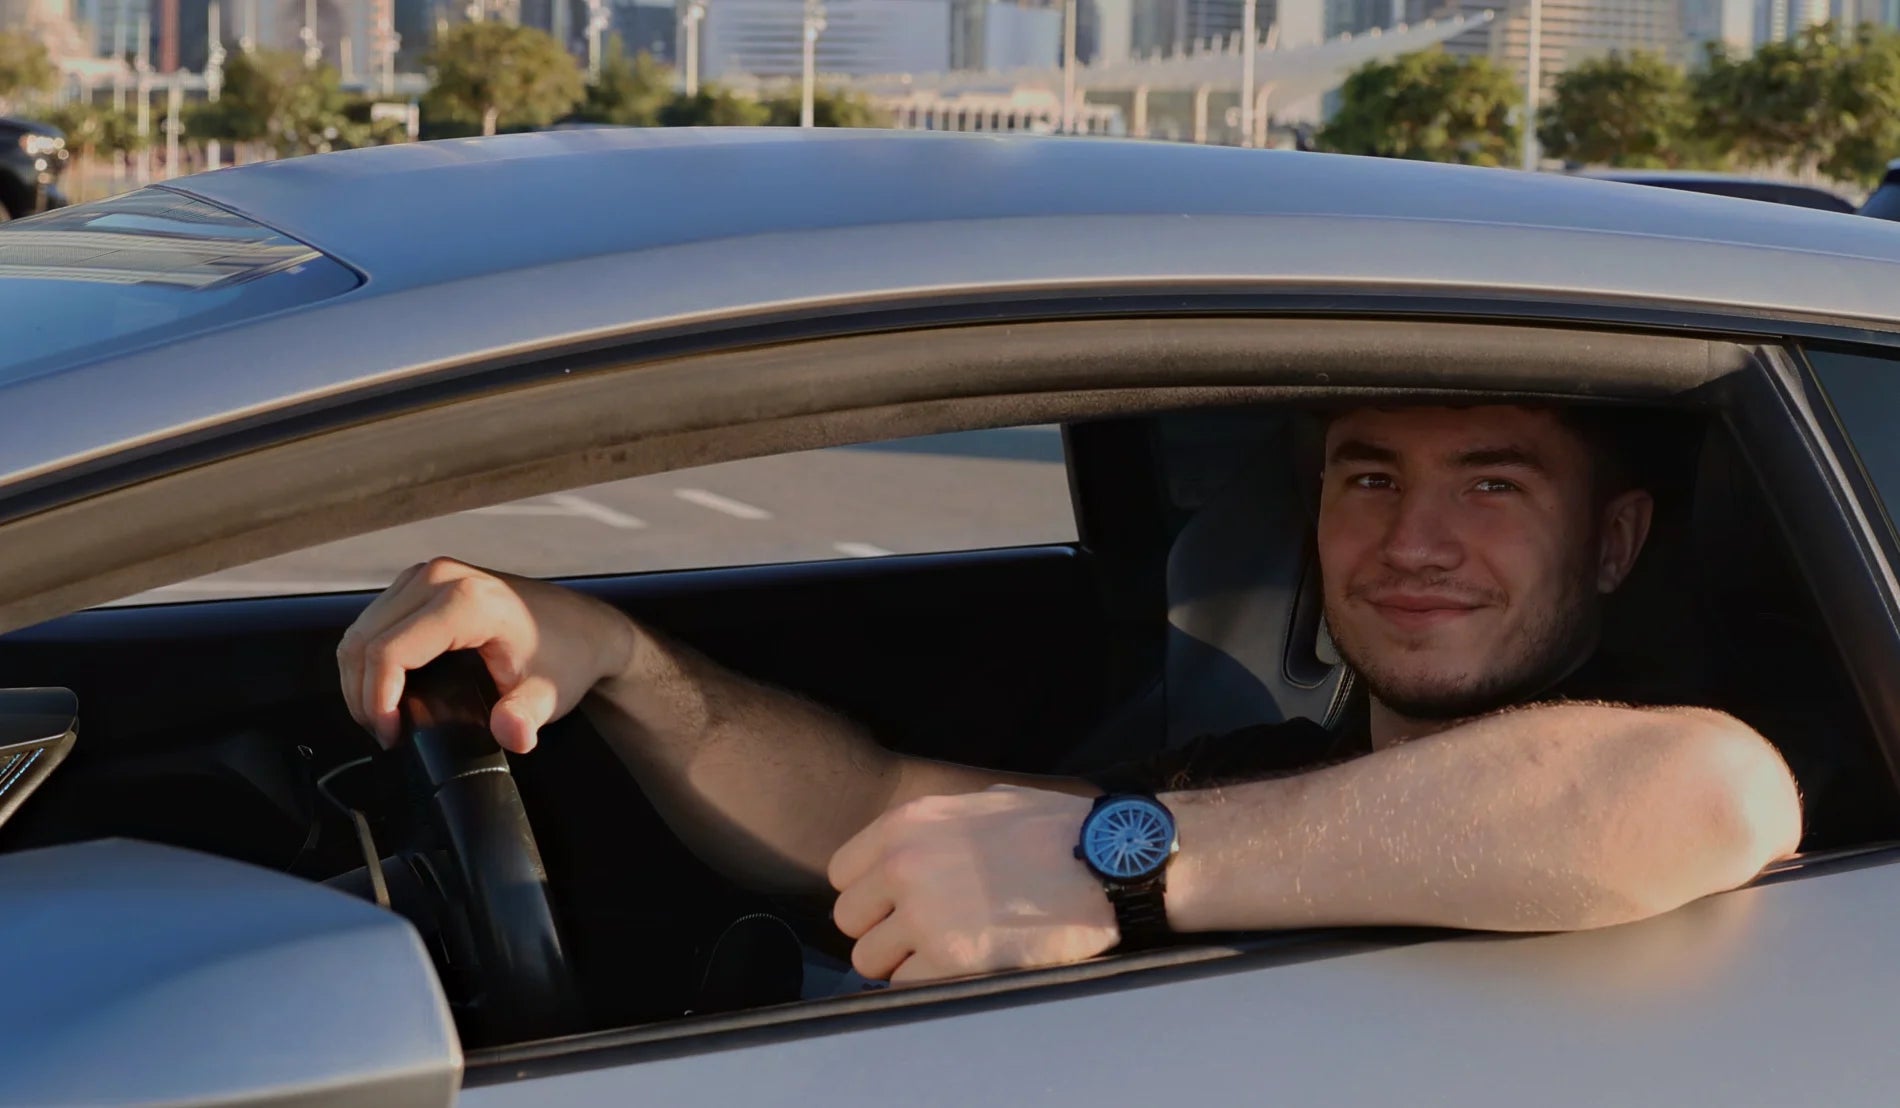 A young man smiles from the driver's seat of a car, wearing a DriftElement watch with a bold rim design on his wrist. The innovative style of the watch reflects the German startup's aim to appeal to car enthusiasts with its unique design.